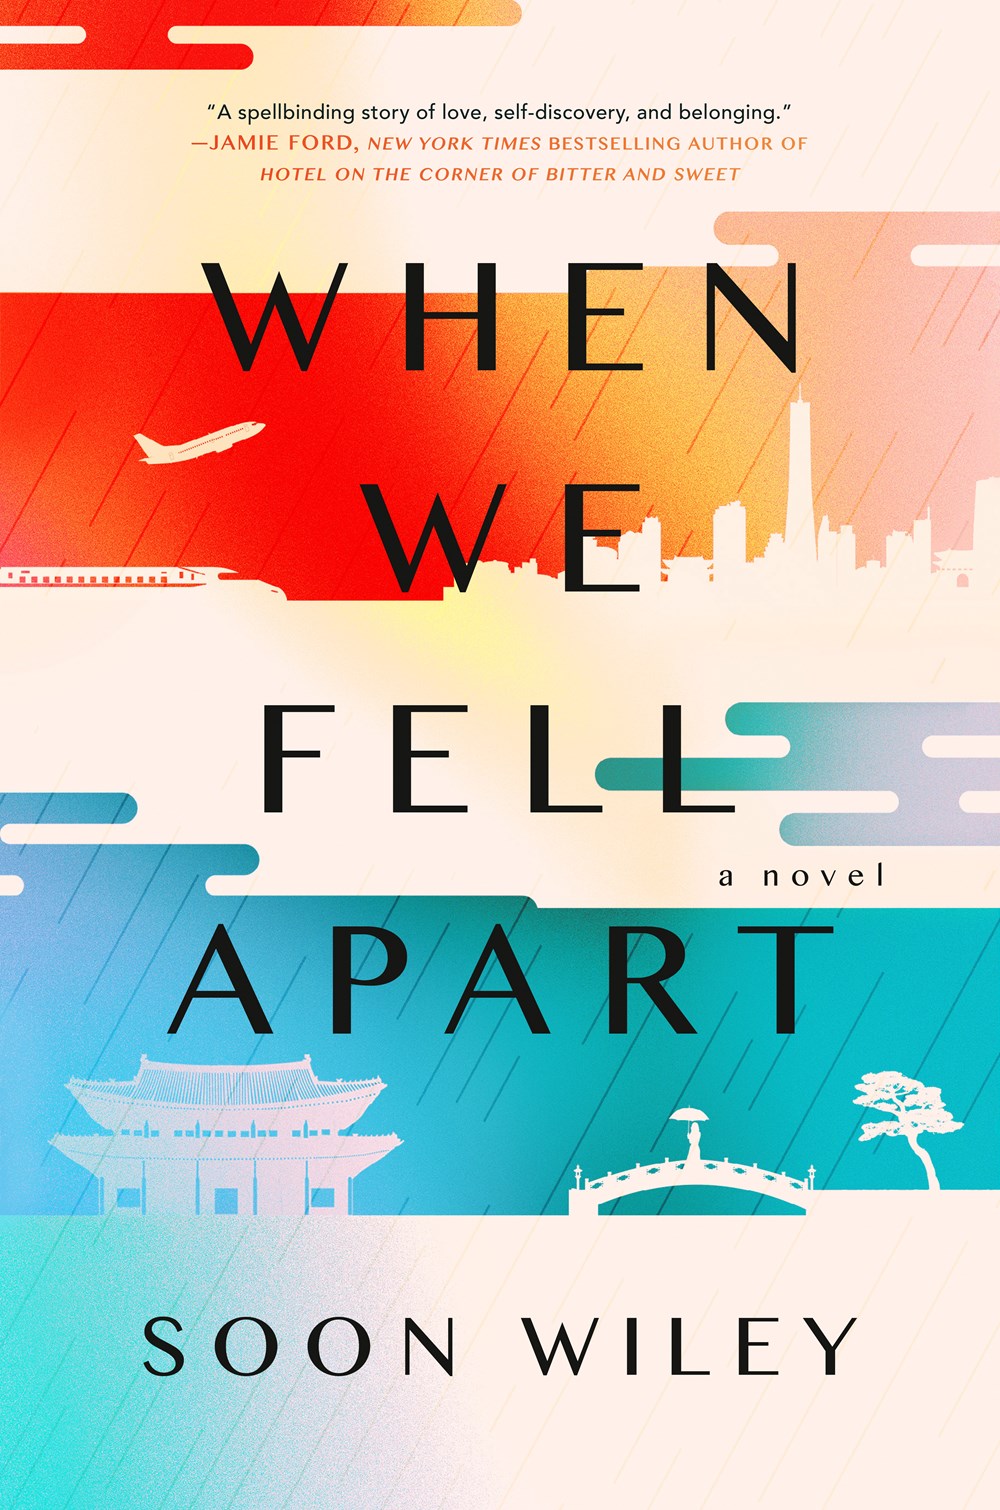 Image of "When We Fell Apart"